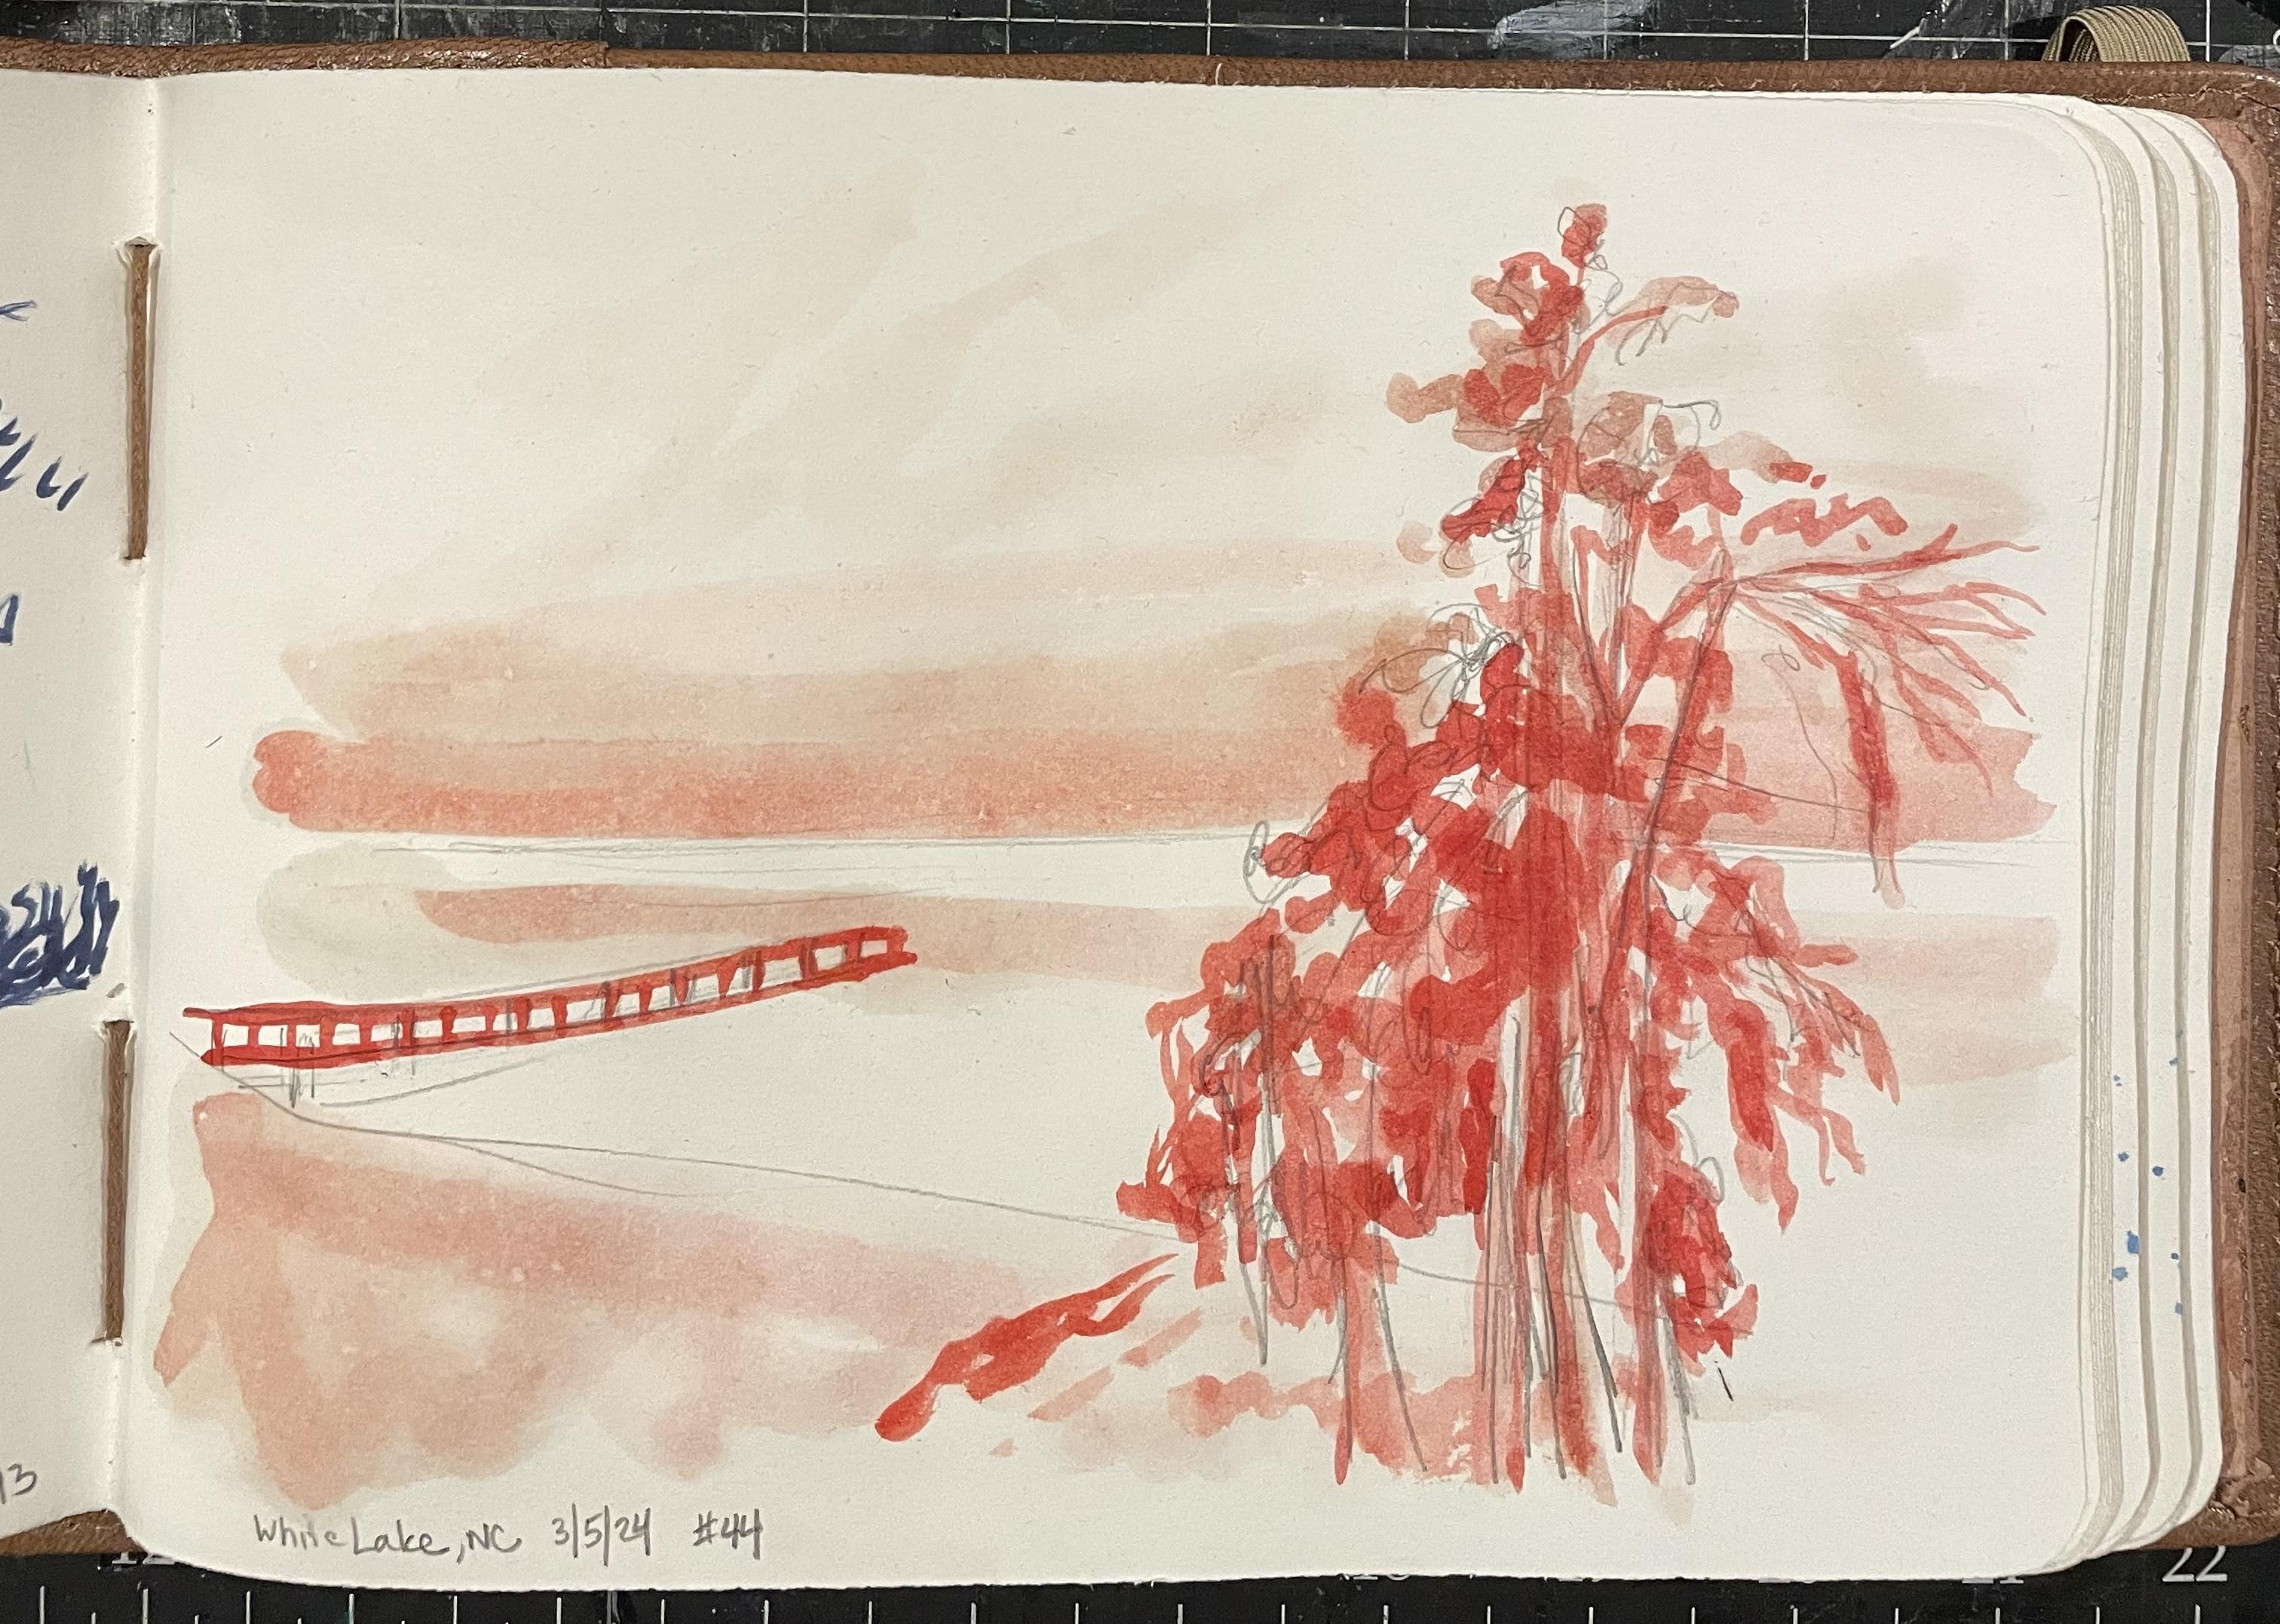 Sketch 44 - Tree over a lake with a pier, painted in red monochrome watercolor